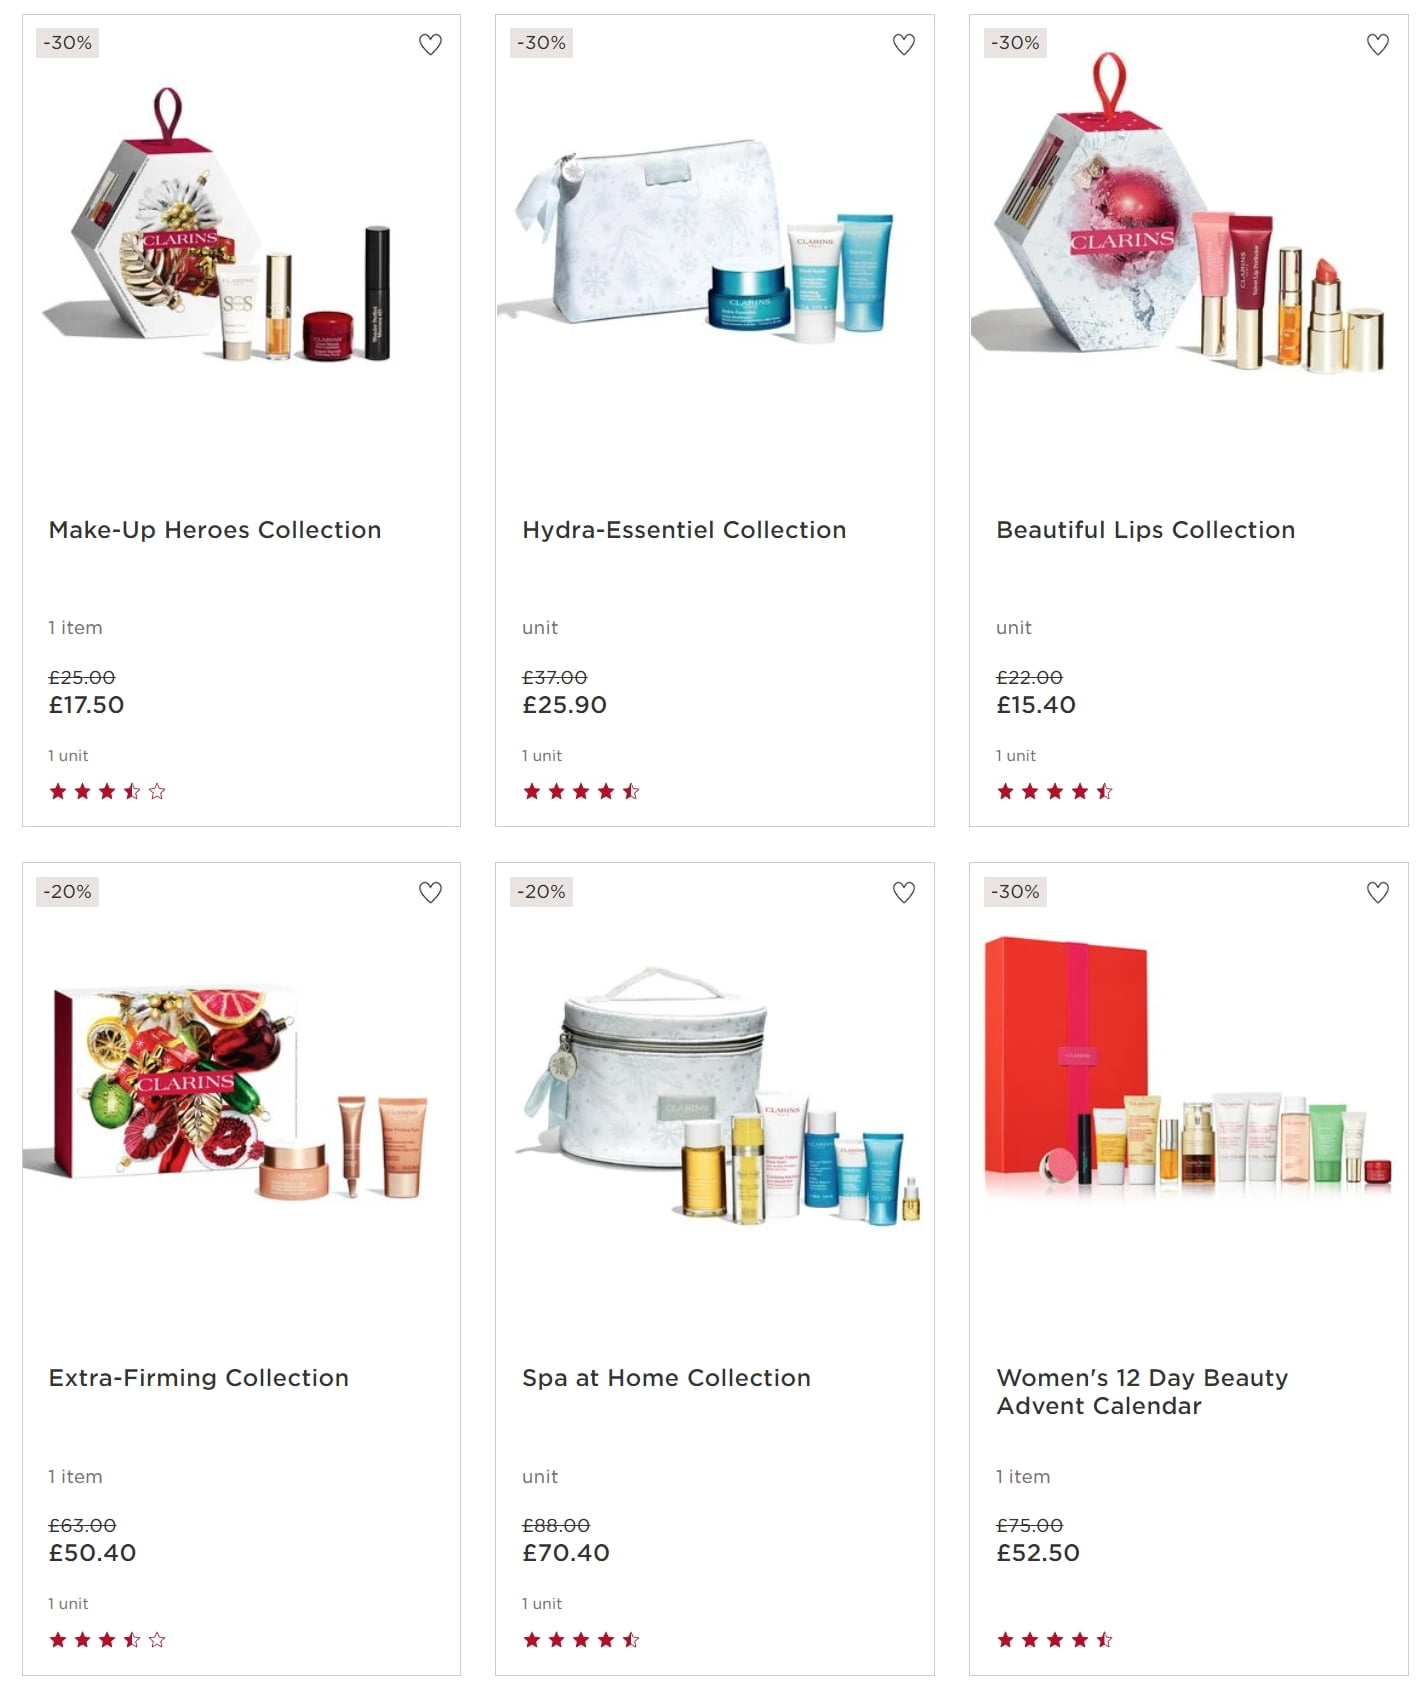 Winter Sale at Clarins: Up to 30% off a selected